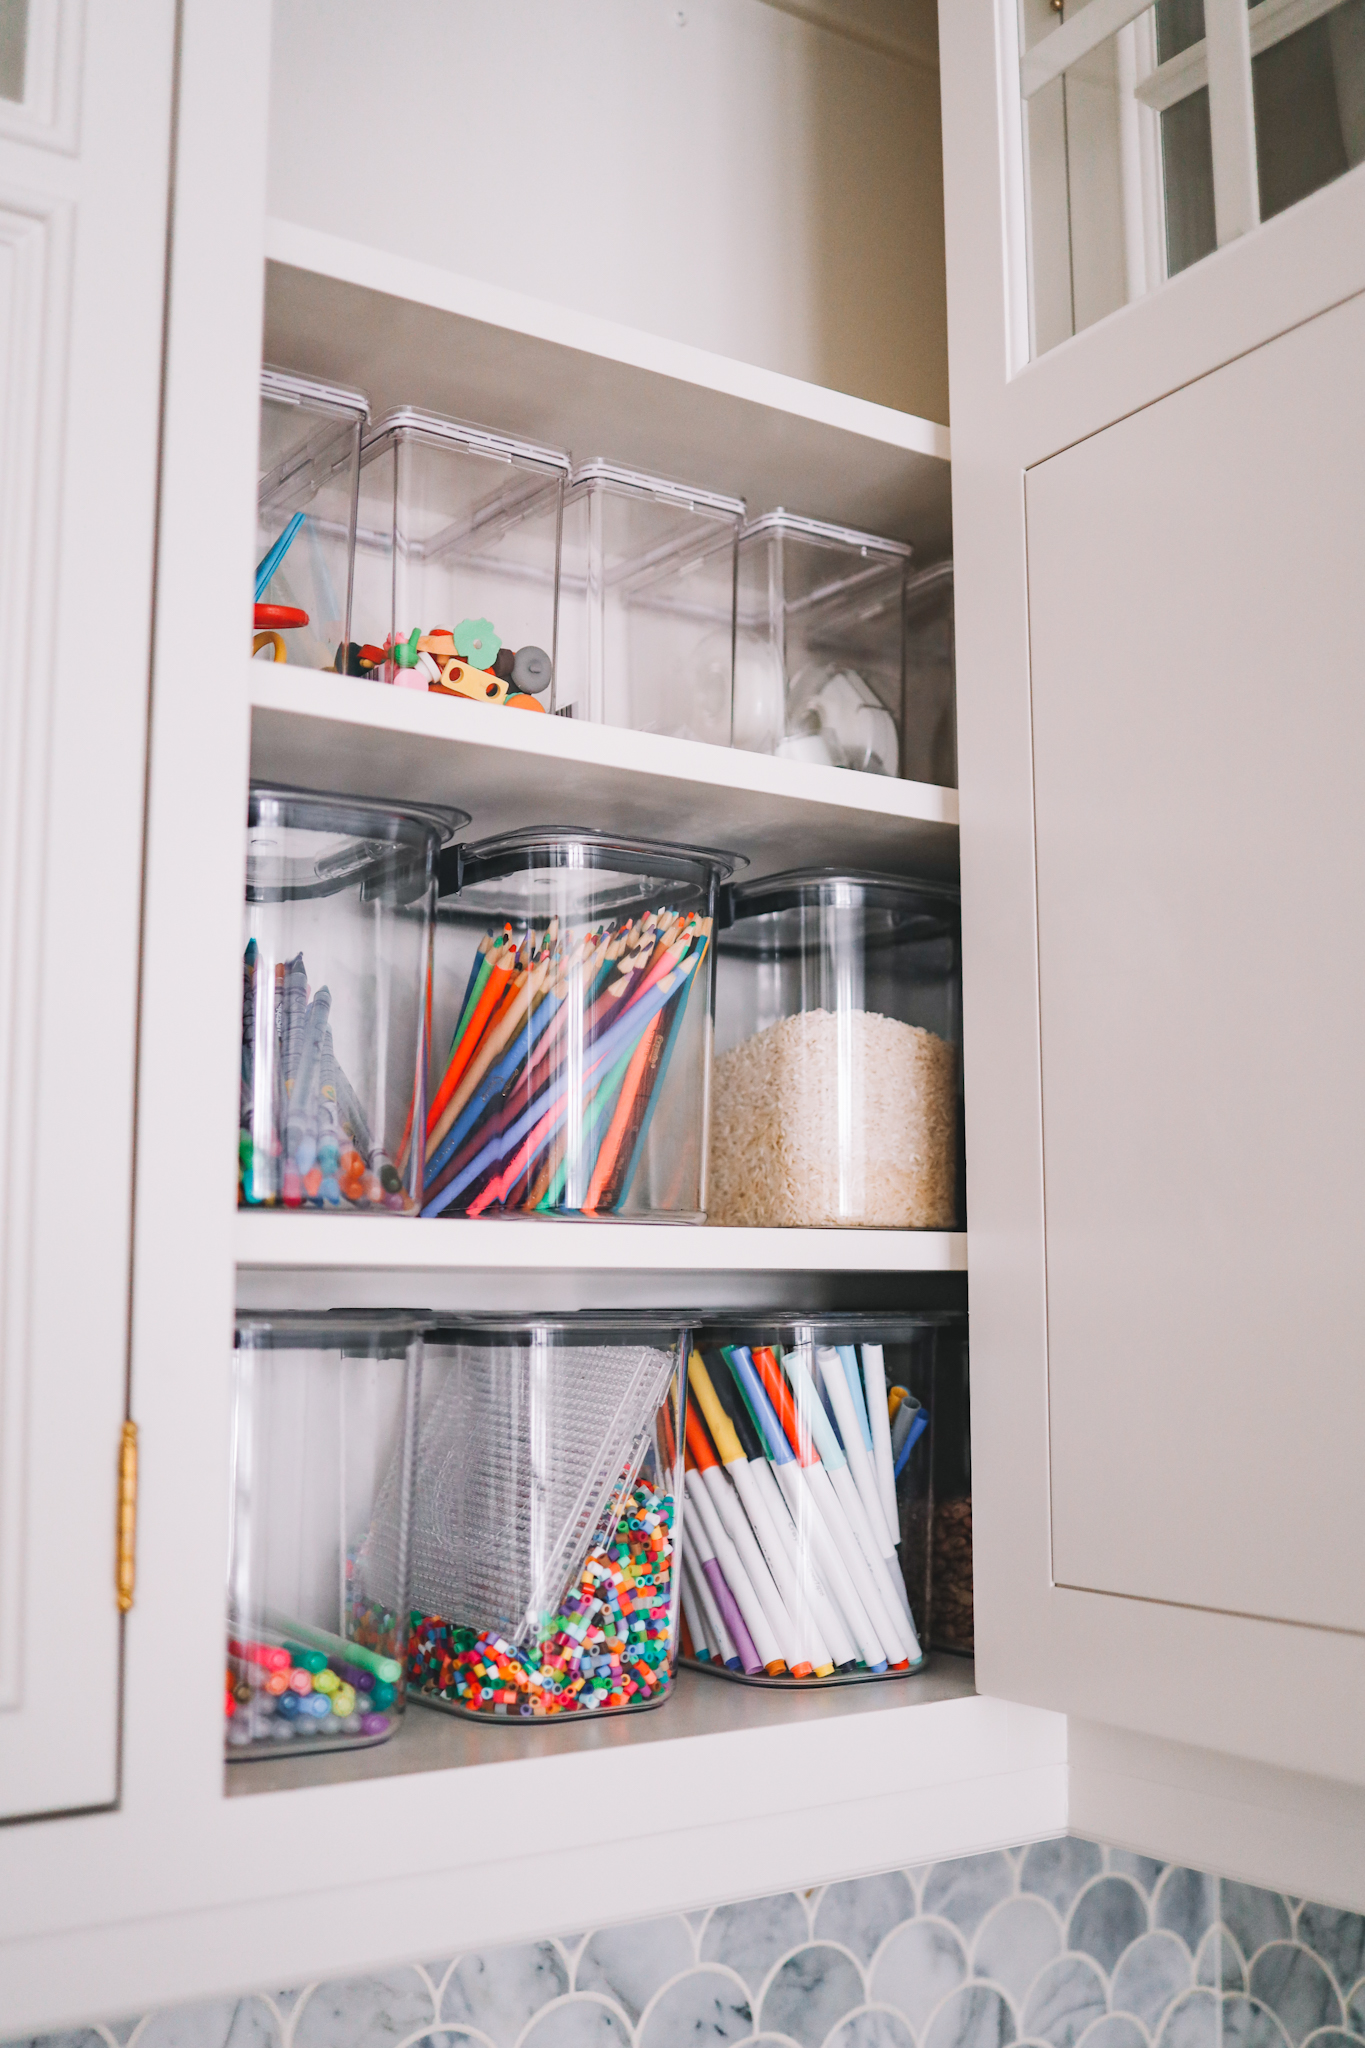 How I Organized Our Craft Cabinets